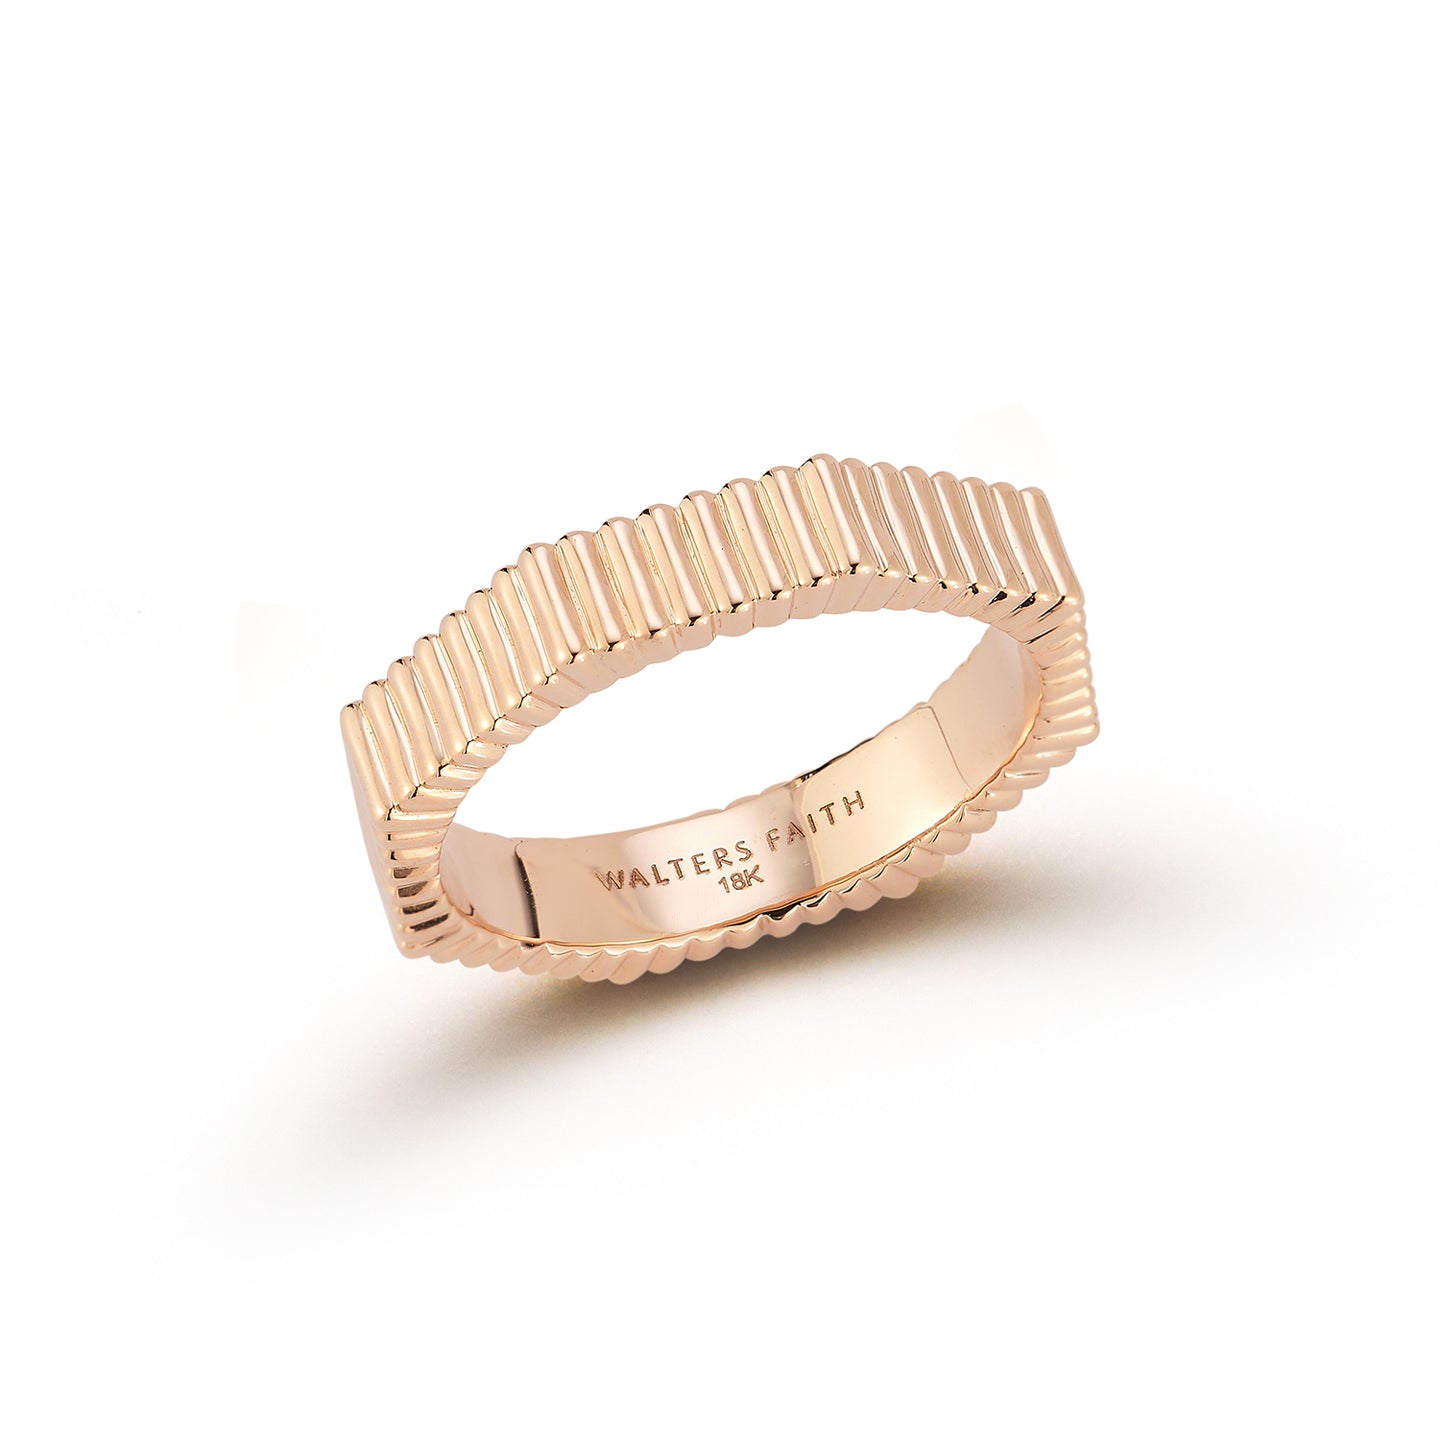 CARRINGTON 18K ROSE GOLD FLUTED OCTAGON BAND RING